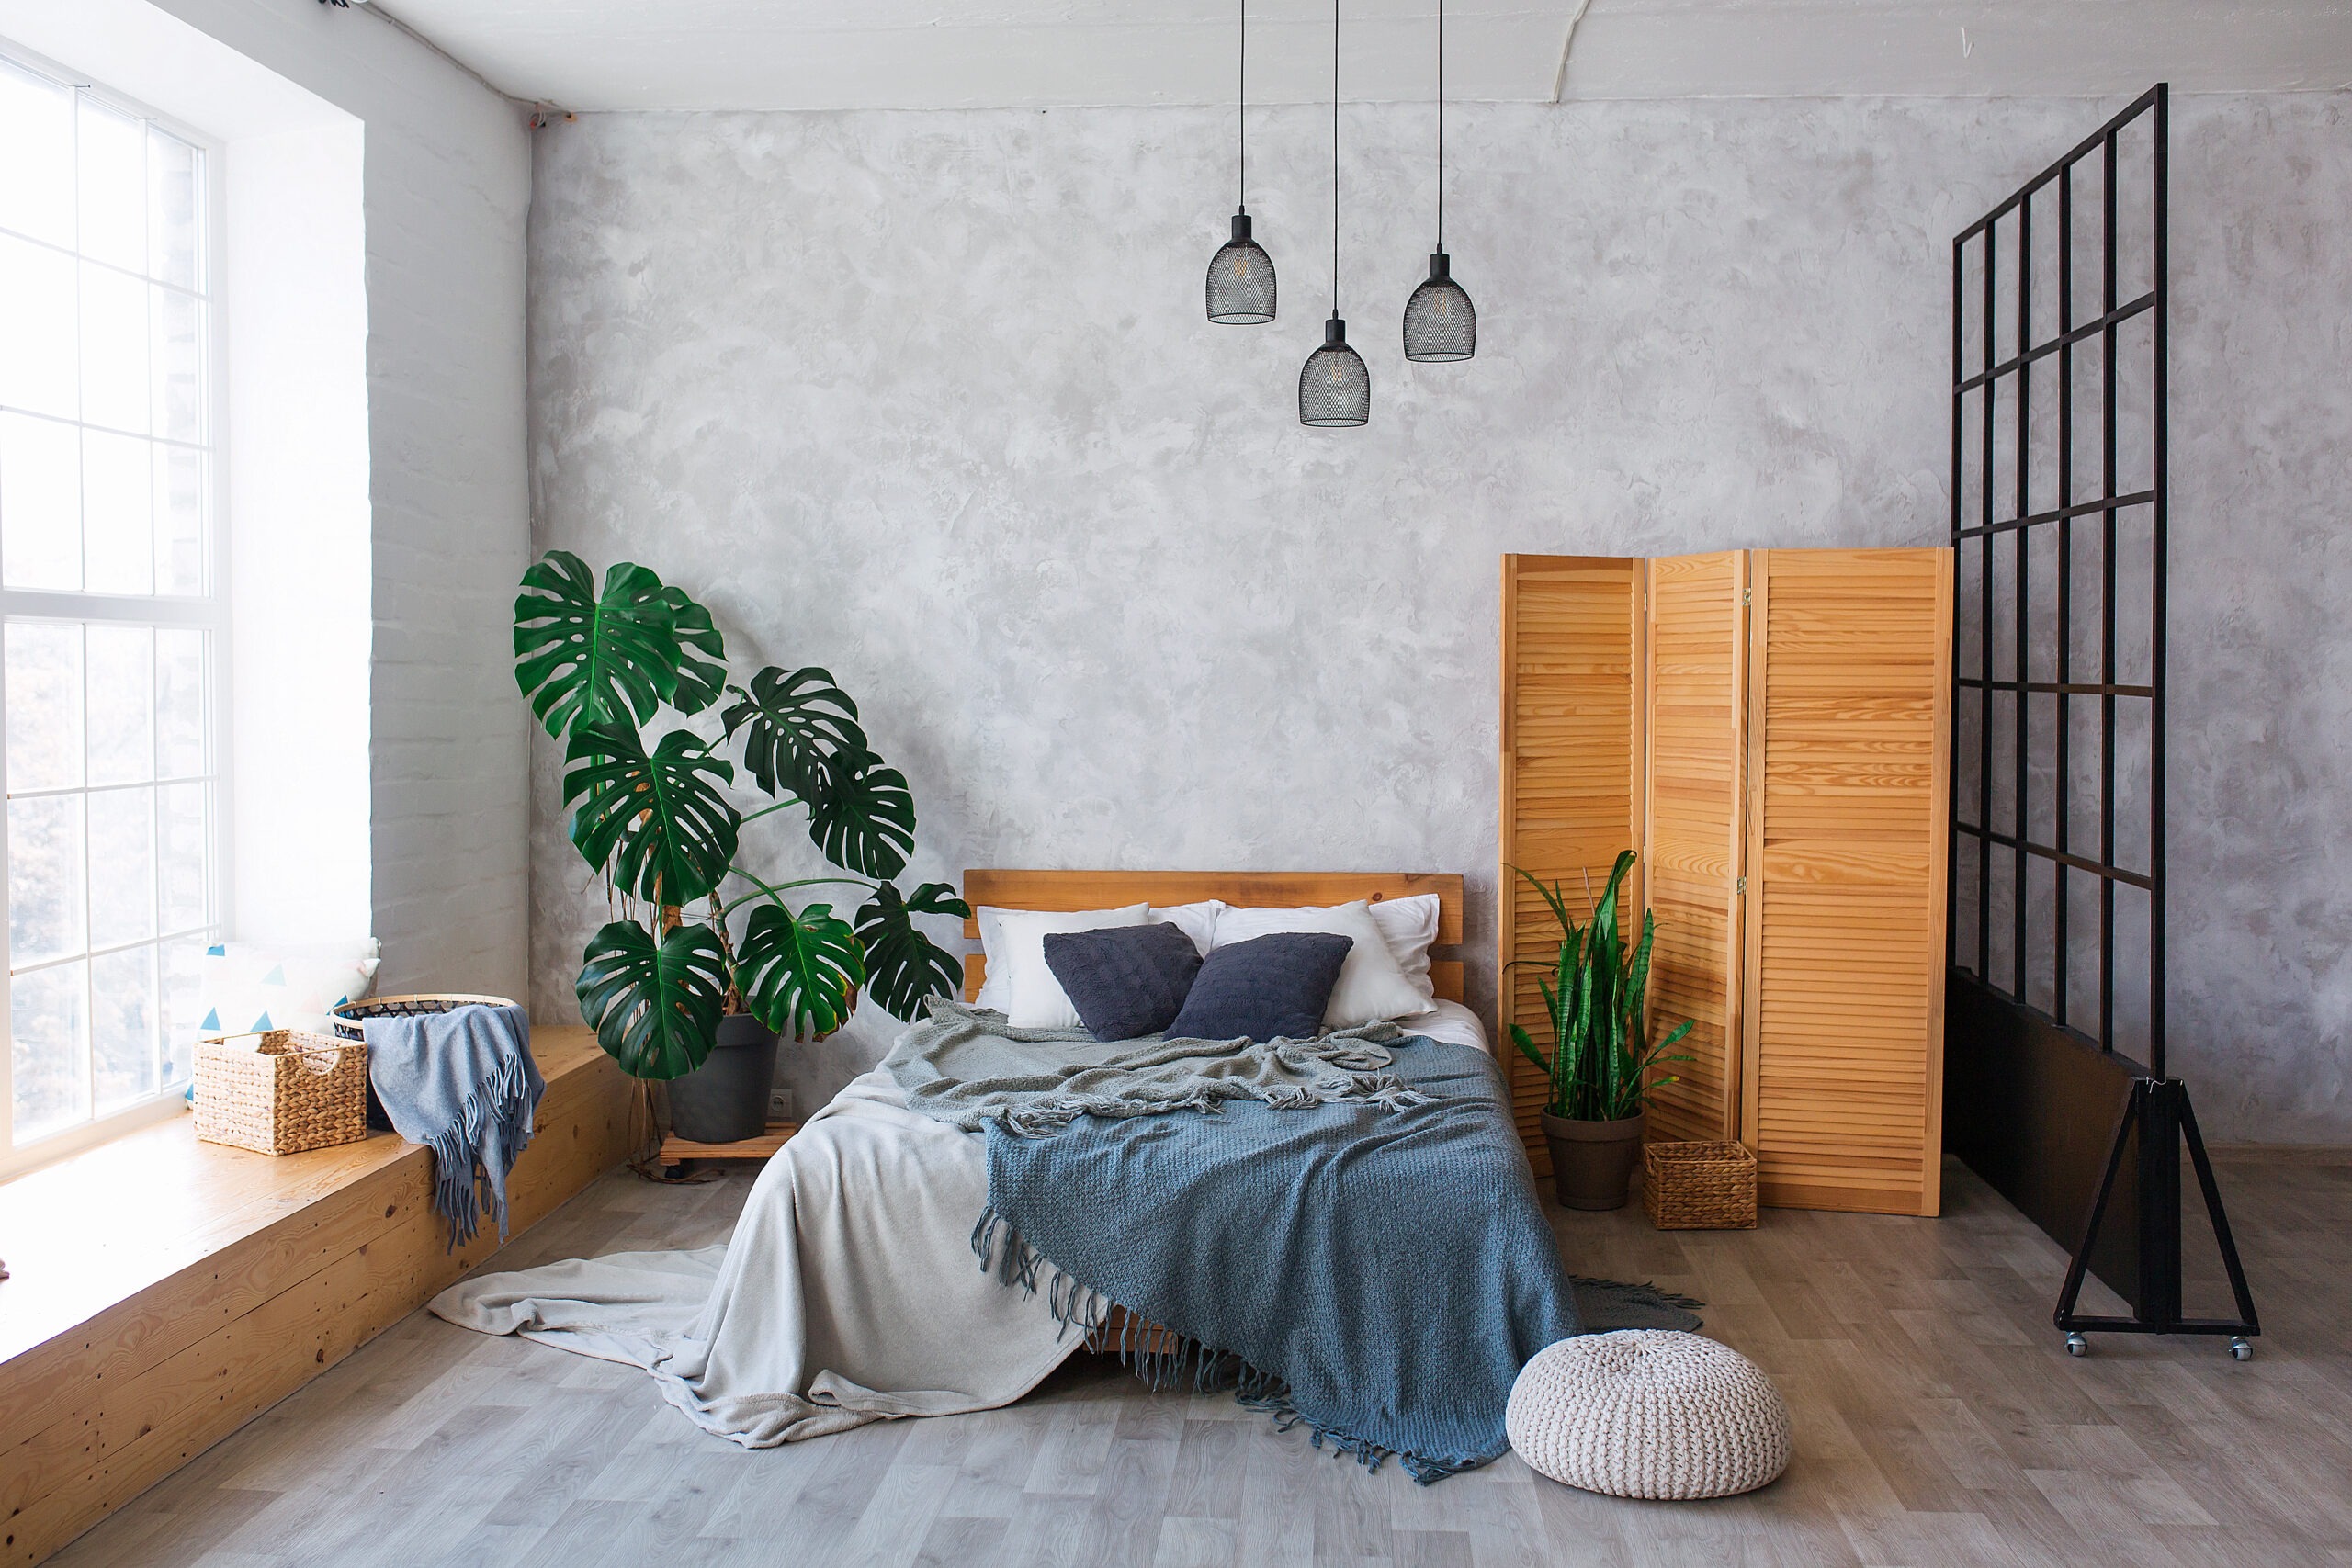 Cozy bedroom area at luxury studio apartment with a free layout in a loft style with big panoramic window and green plant.